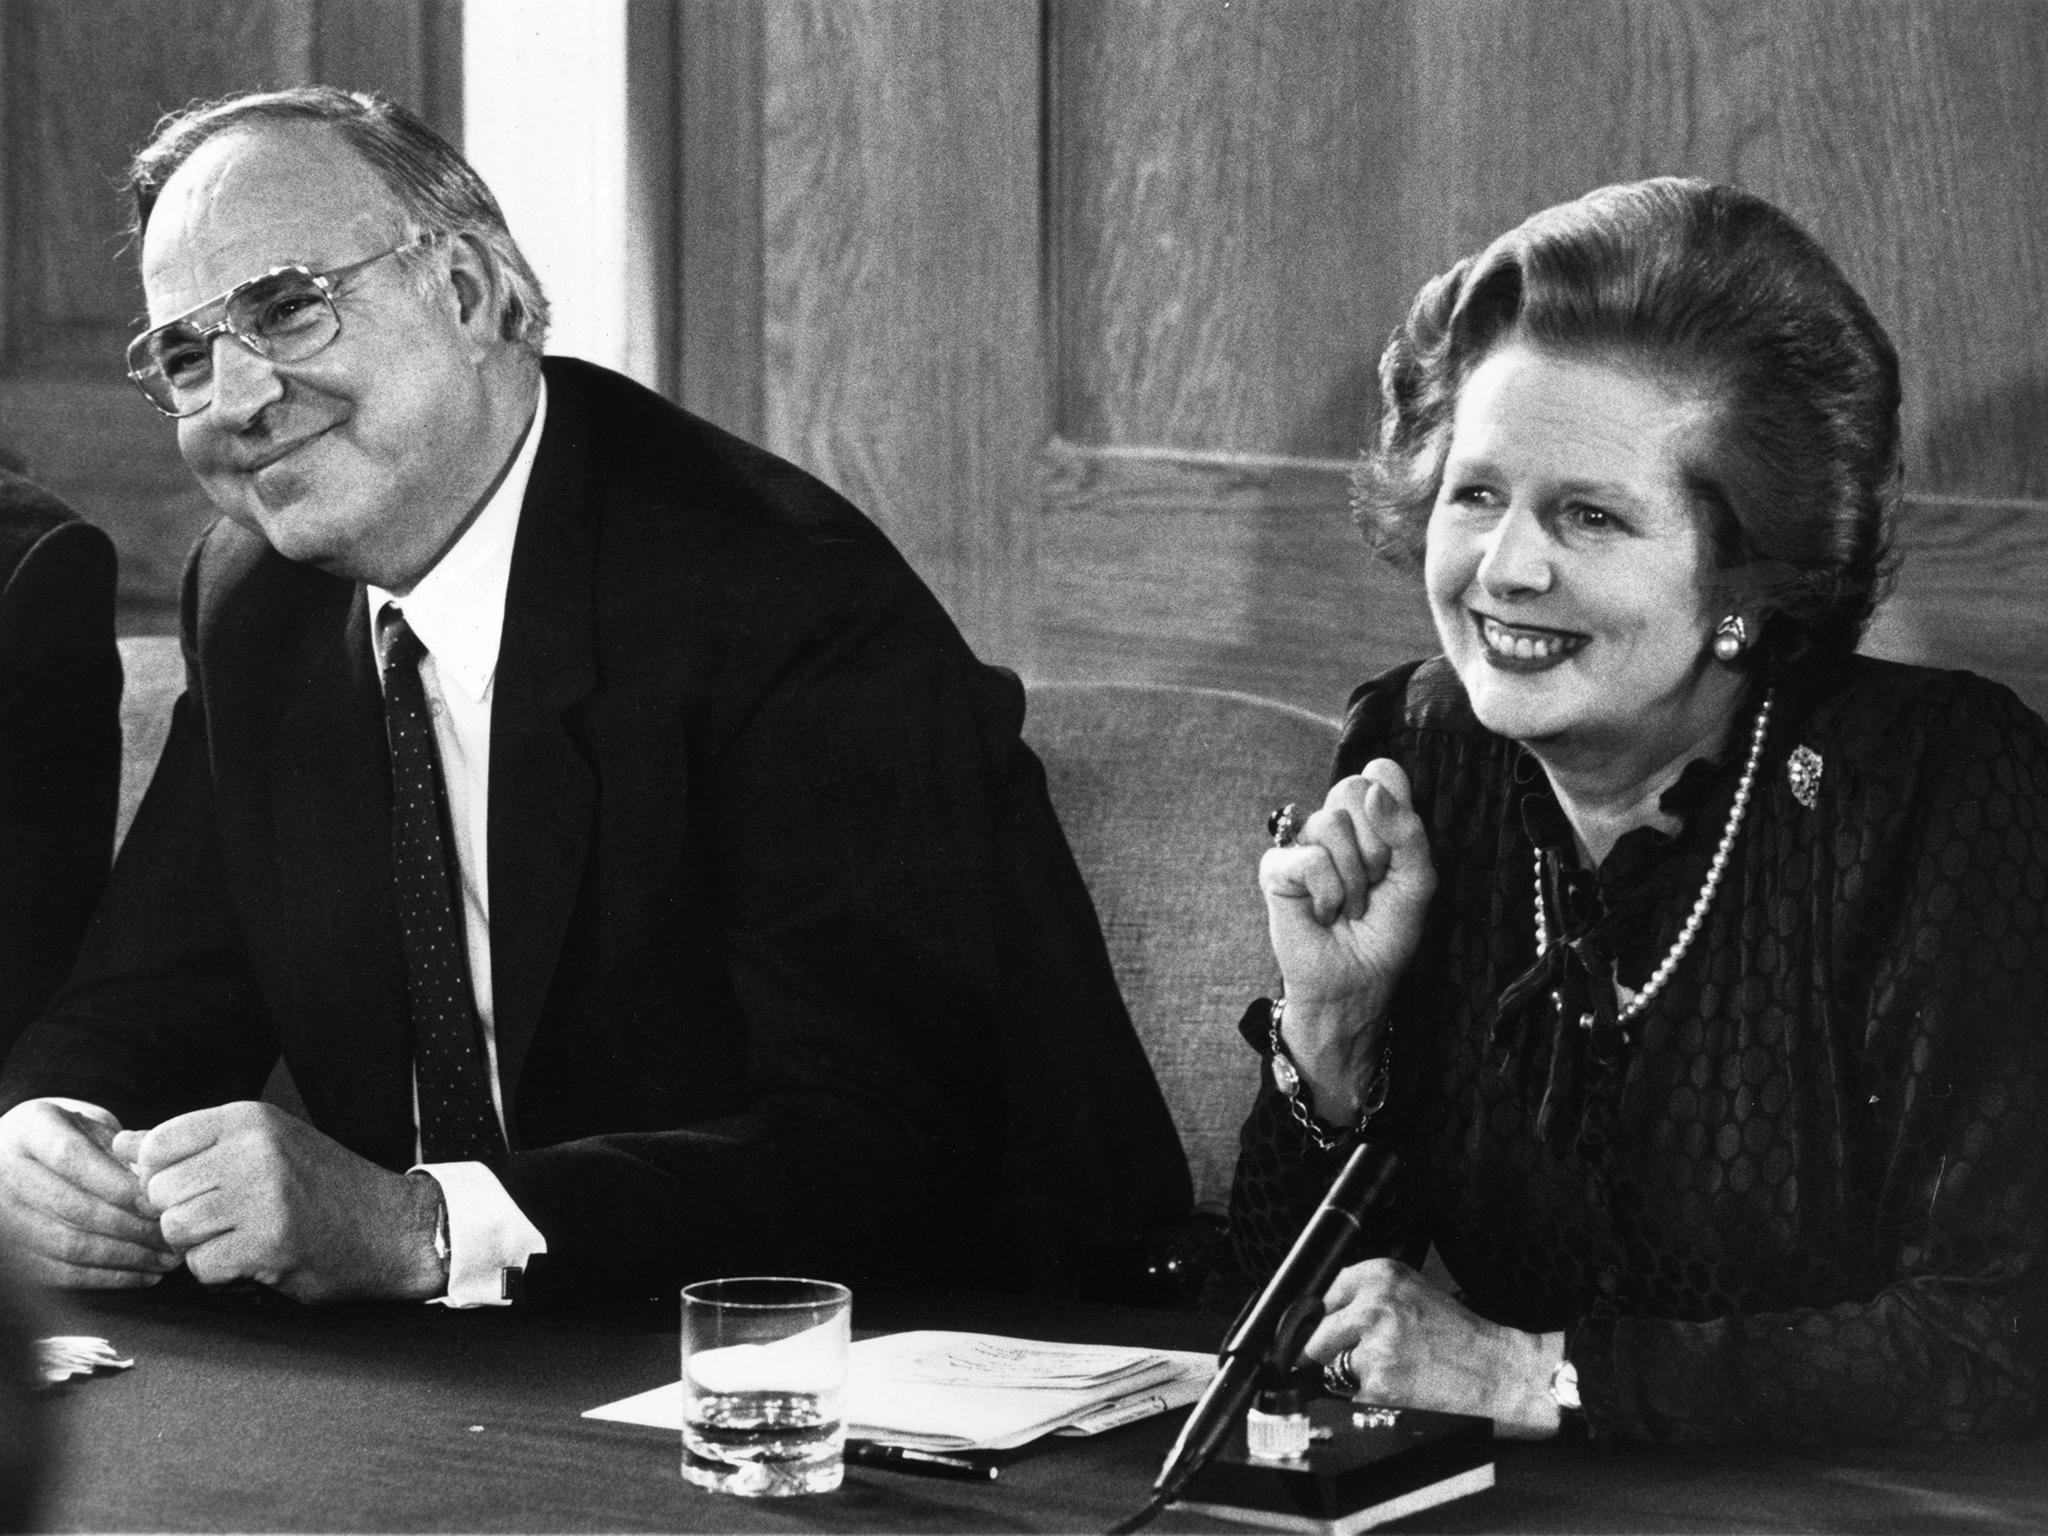 Sidelined: Helmut Kohl, with Margaret Thatcher in 1983, oversaw the reunification of Germany and was a stabilizing influence in Europe after the fall of the Berlin Wall